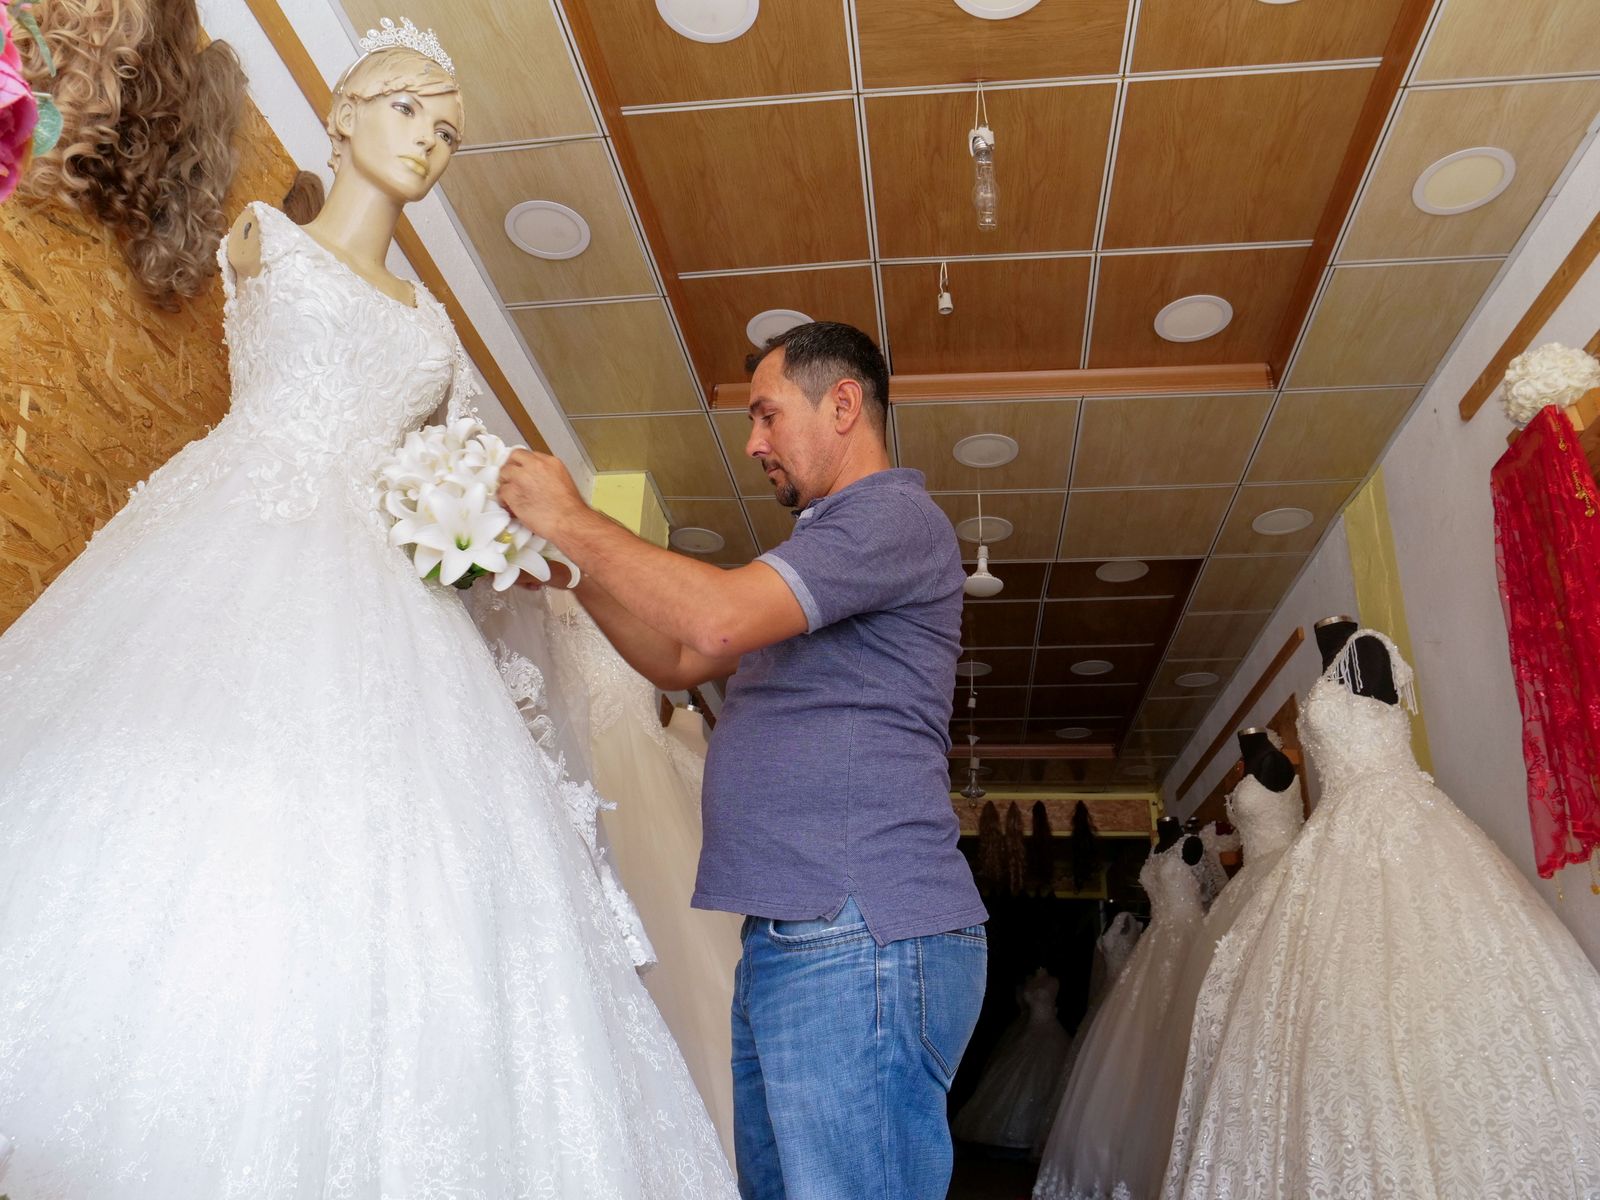 Aziz Abdullah, who wishes to leave the town with his family, works in his wedding dress shop in the town of Shiladze - REUTERS